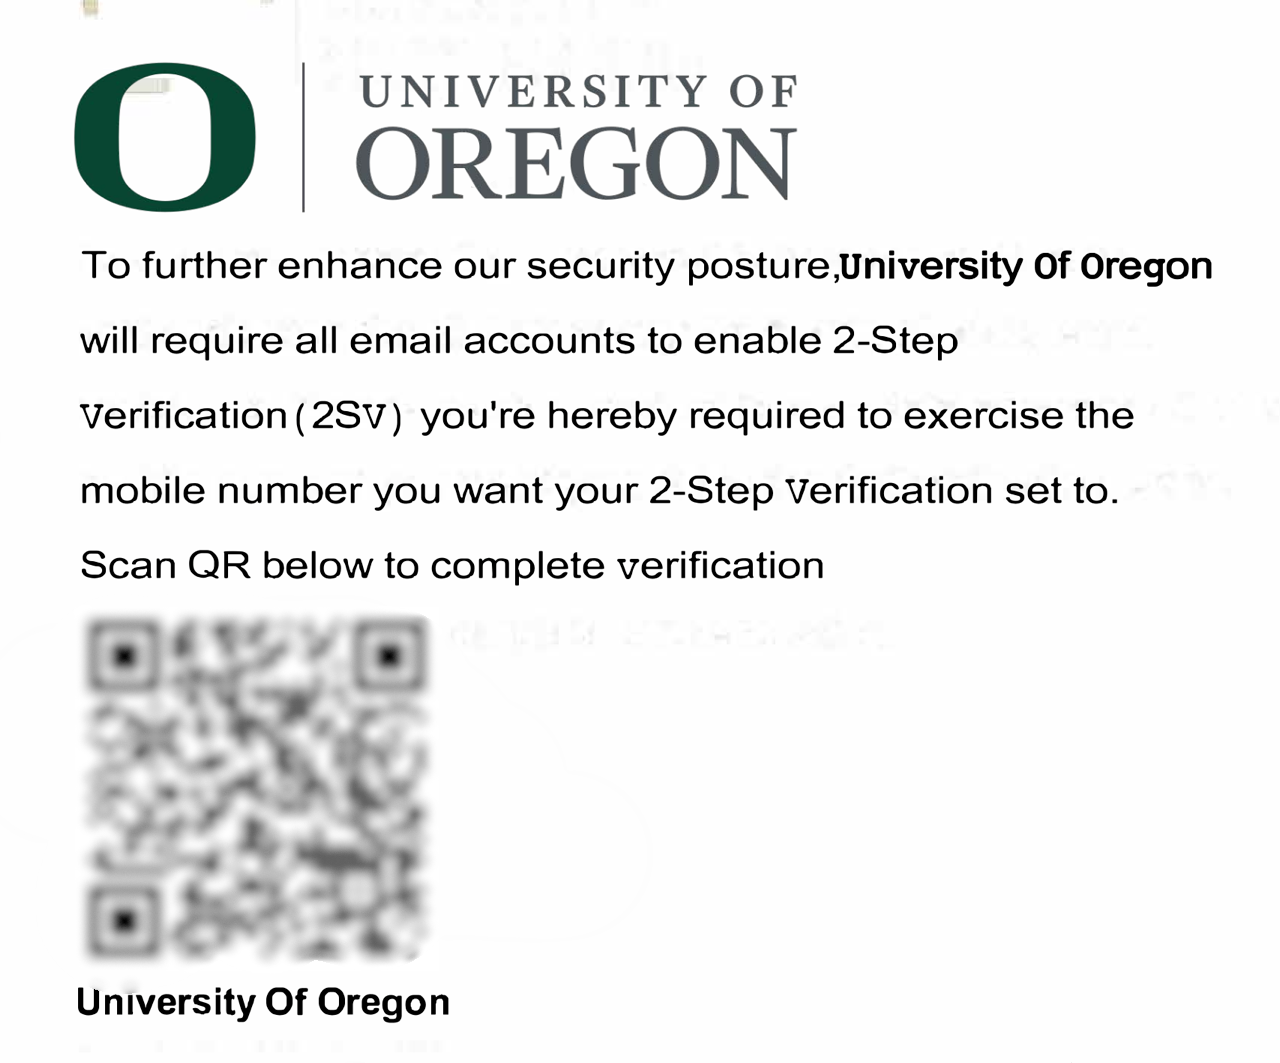 University of Oregon logo on top and a lot of text about setting up two factor authentication. 